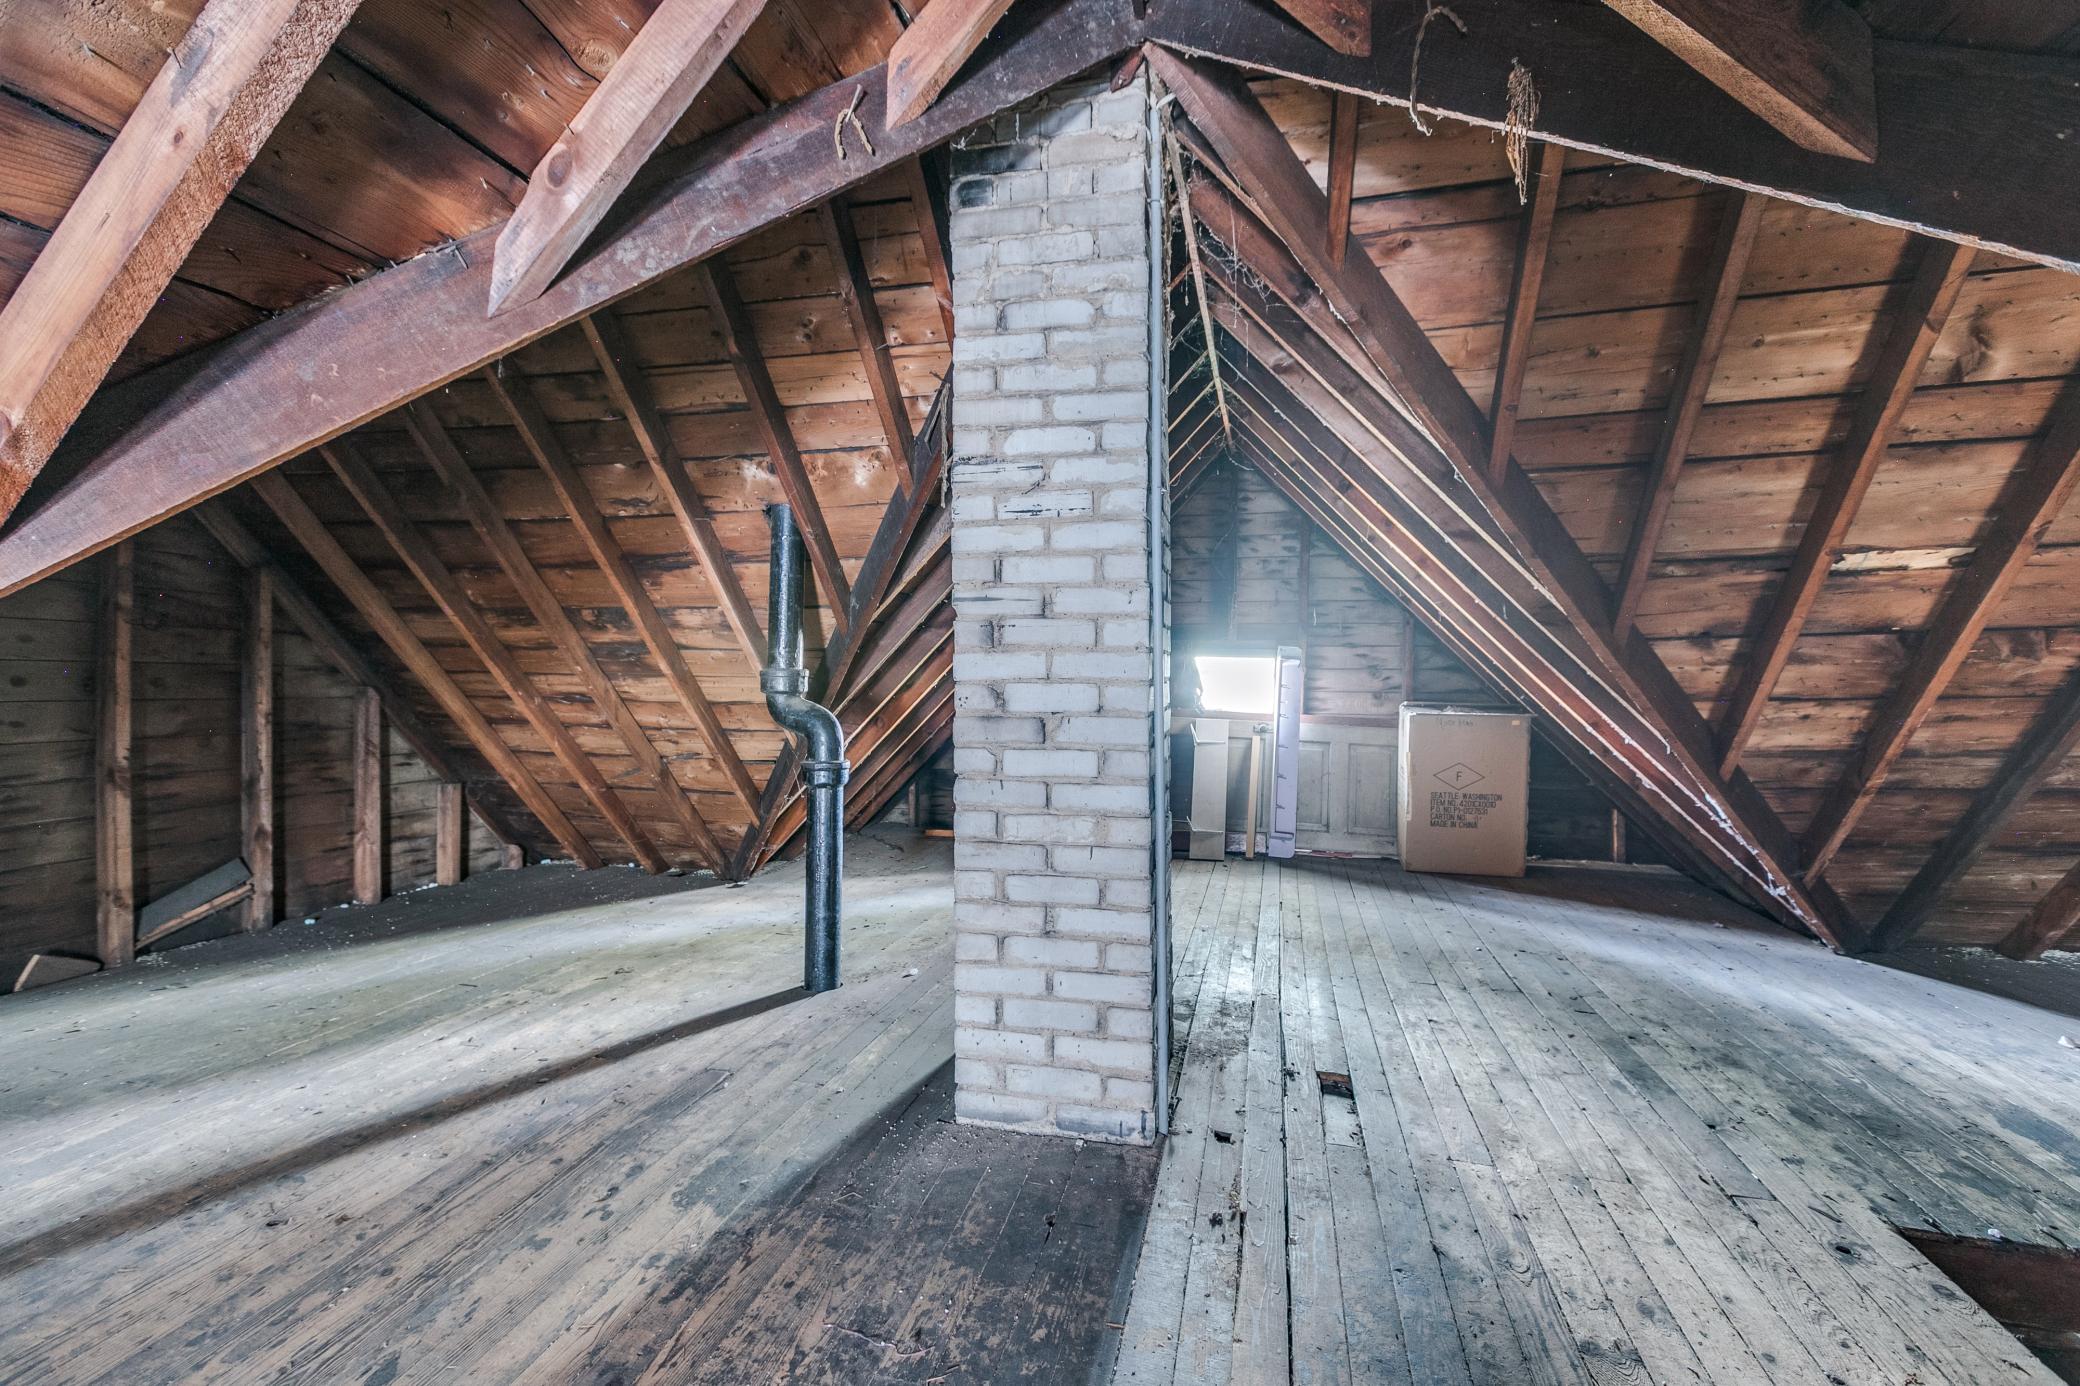 3rd level attic space. Go ahead and finish for additional space or just use for storage.